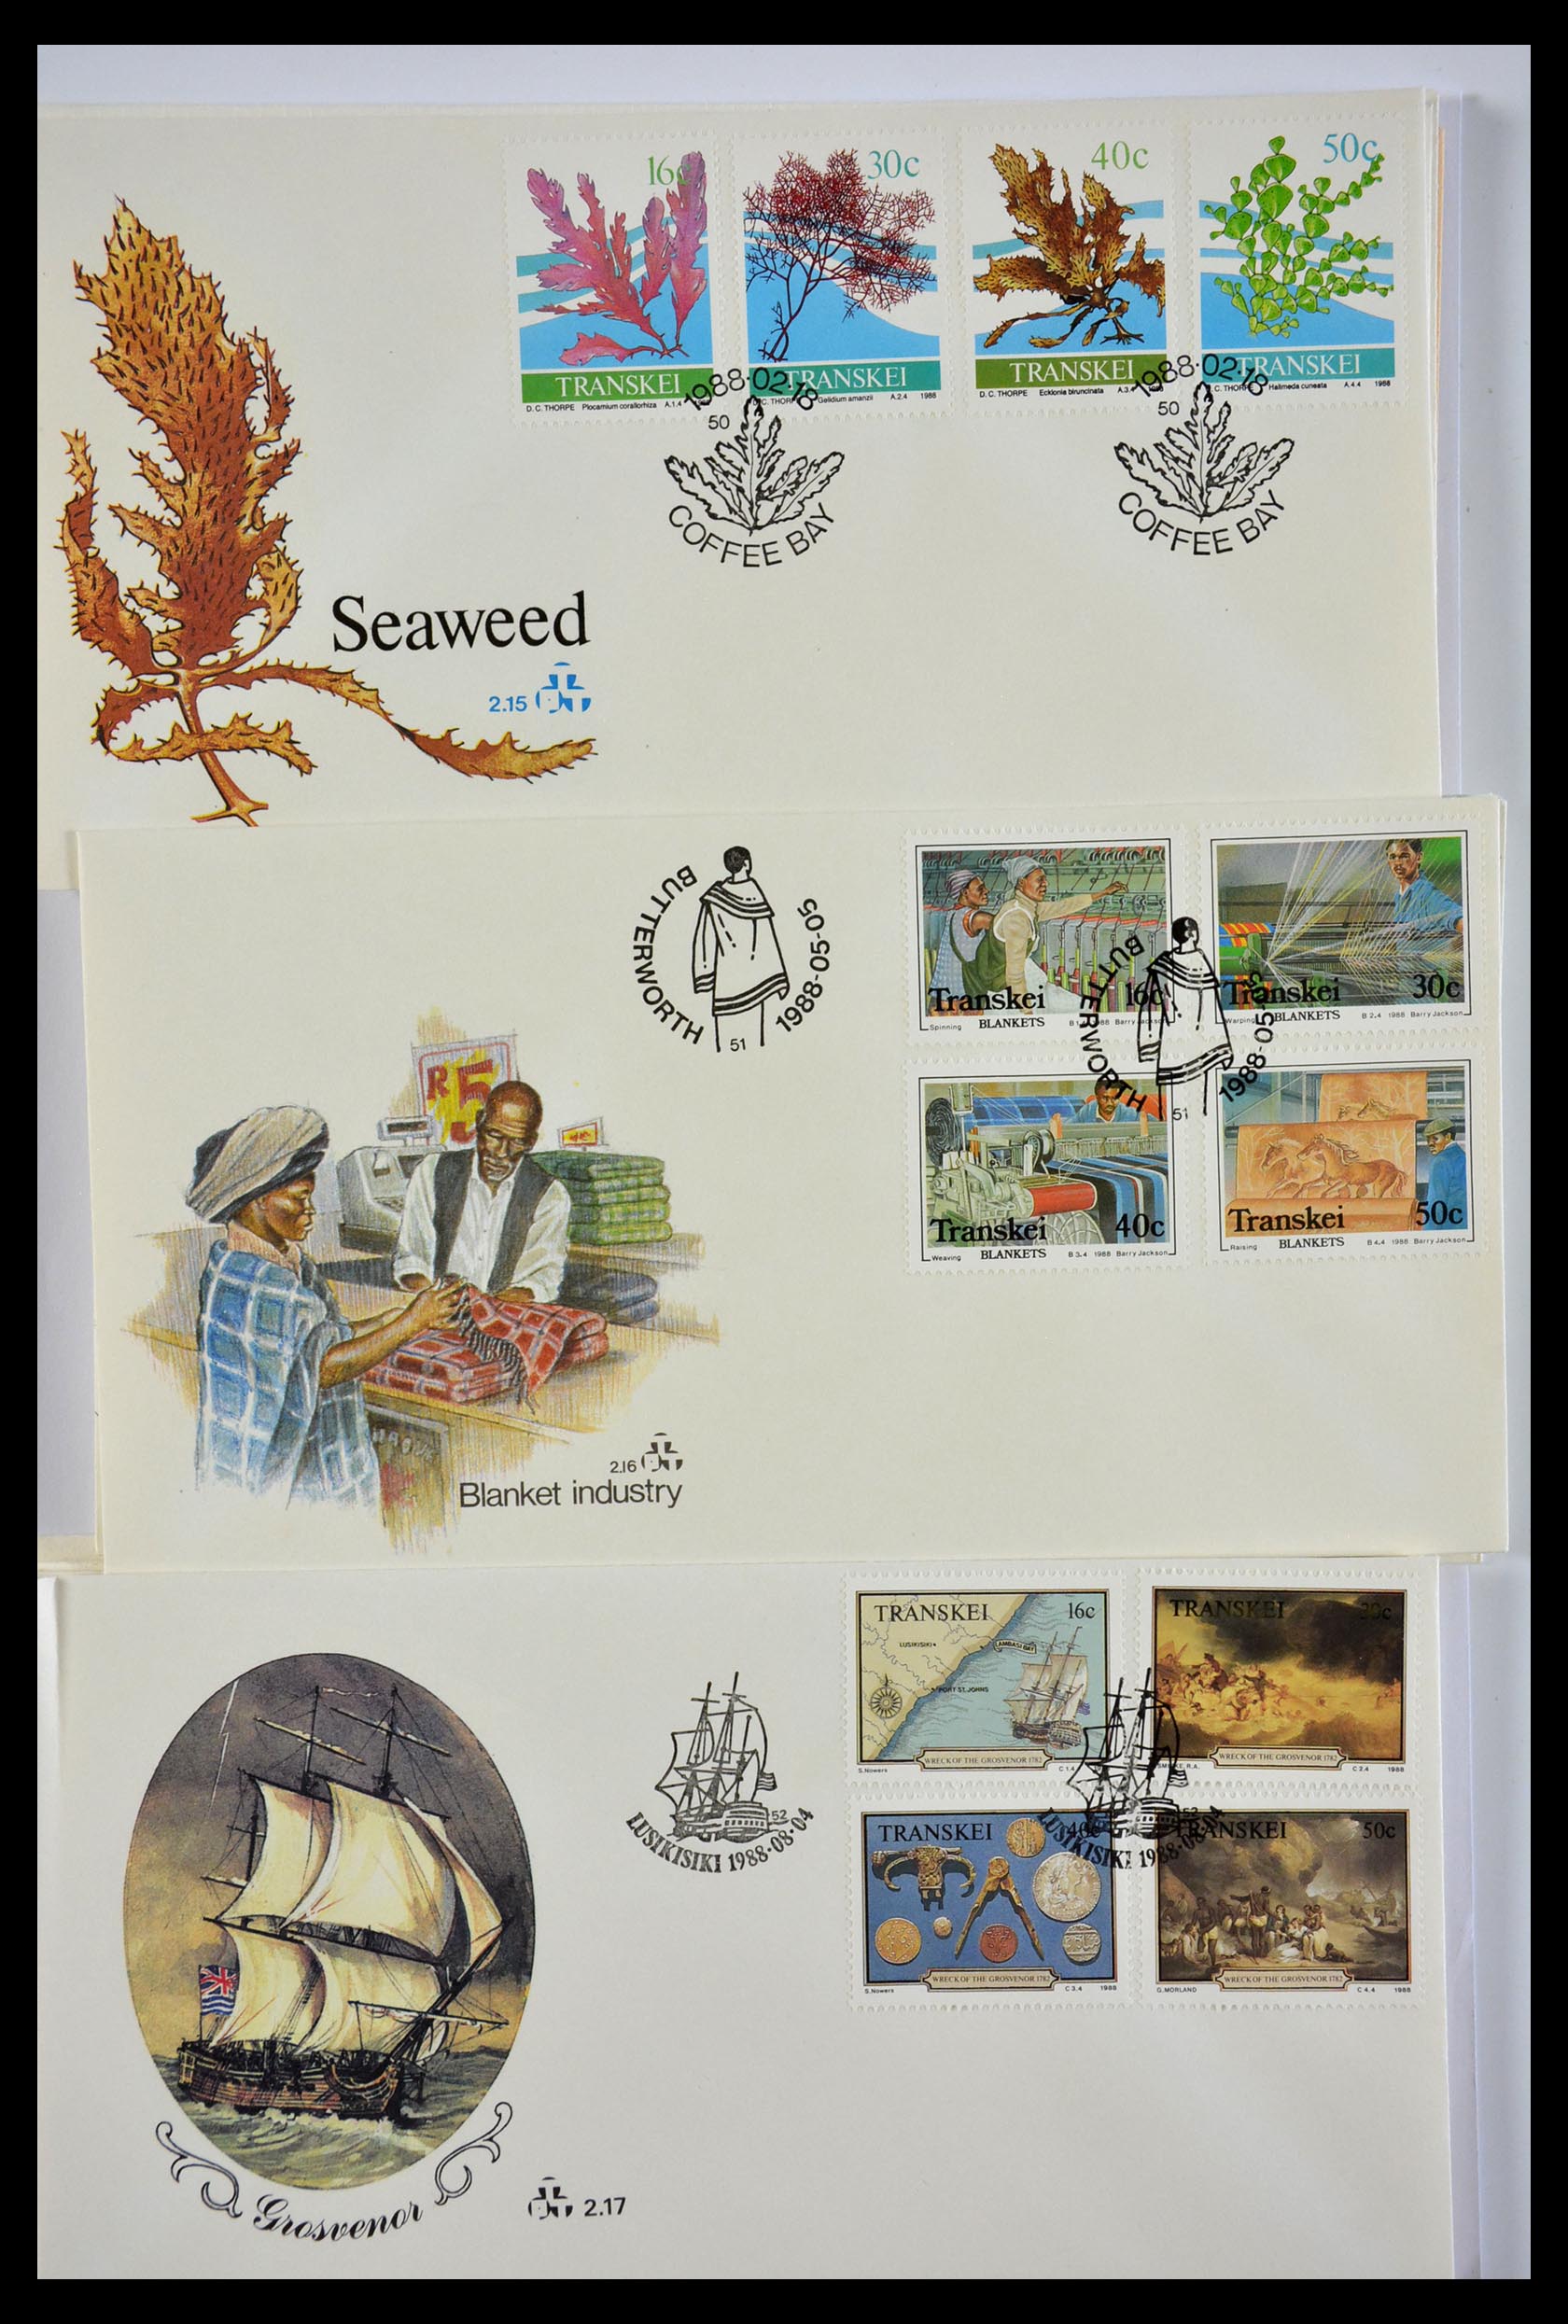 29356 546 - 29356 South Africa homelands first day covers 1979-1991.